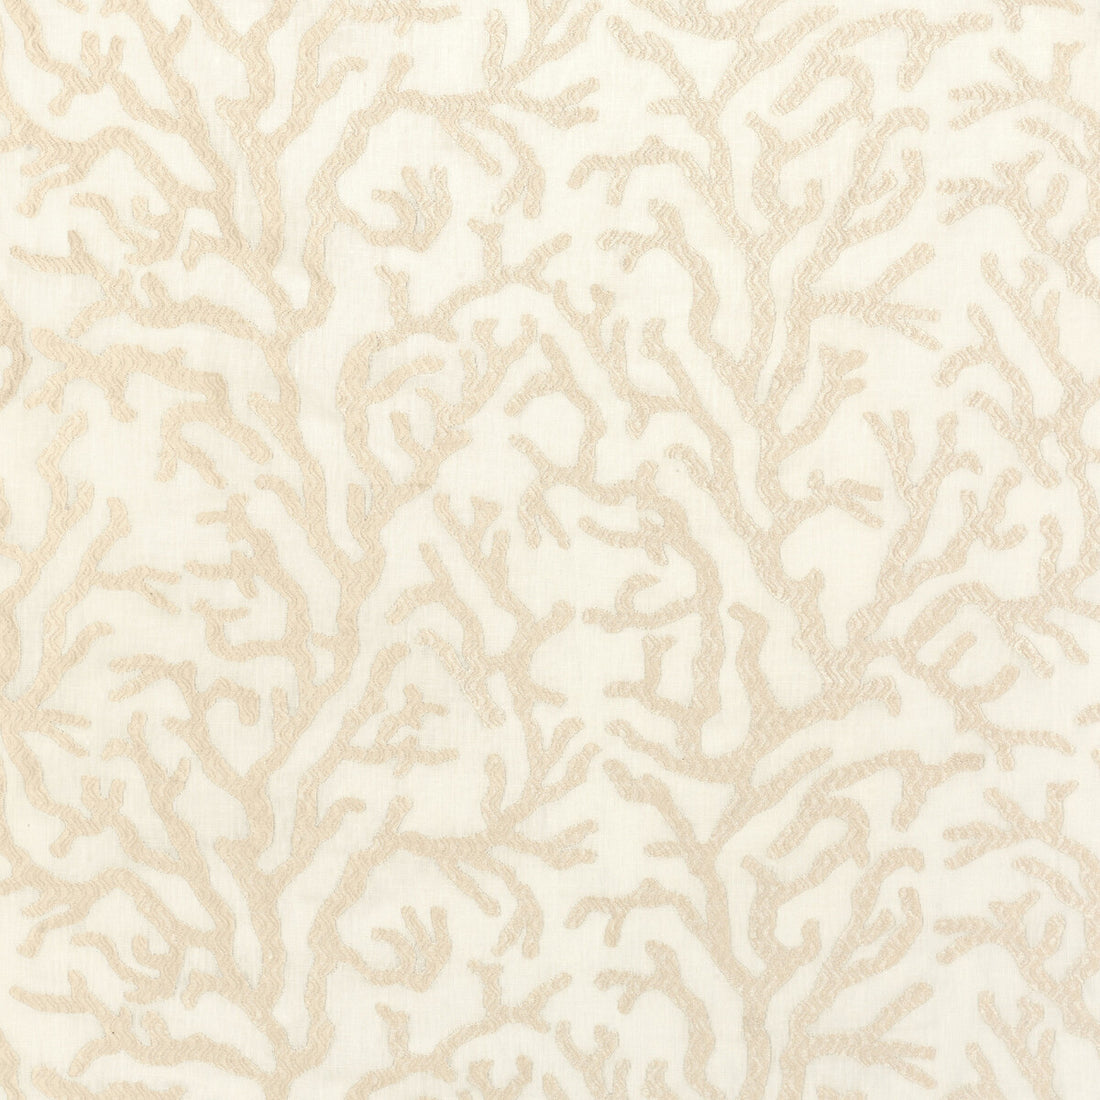 Sheer Reef fabric in ecru color - pattern 3527.1.0 - by Kravet Couture